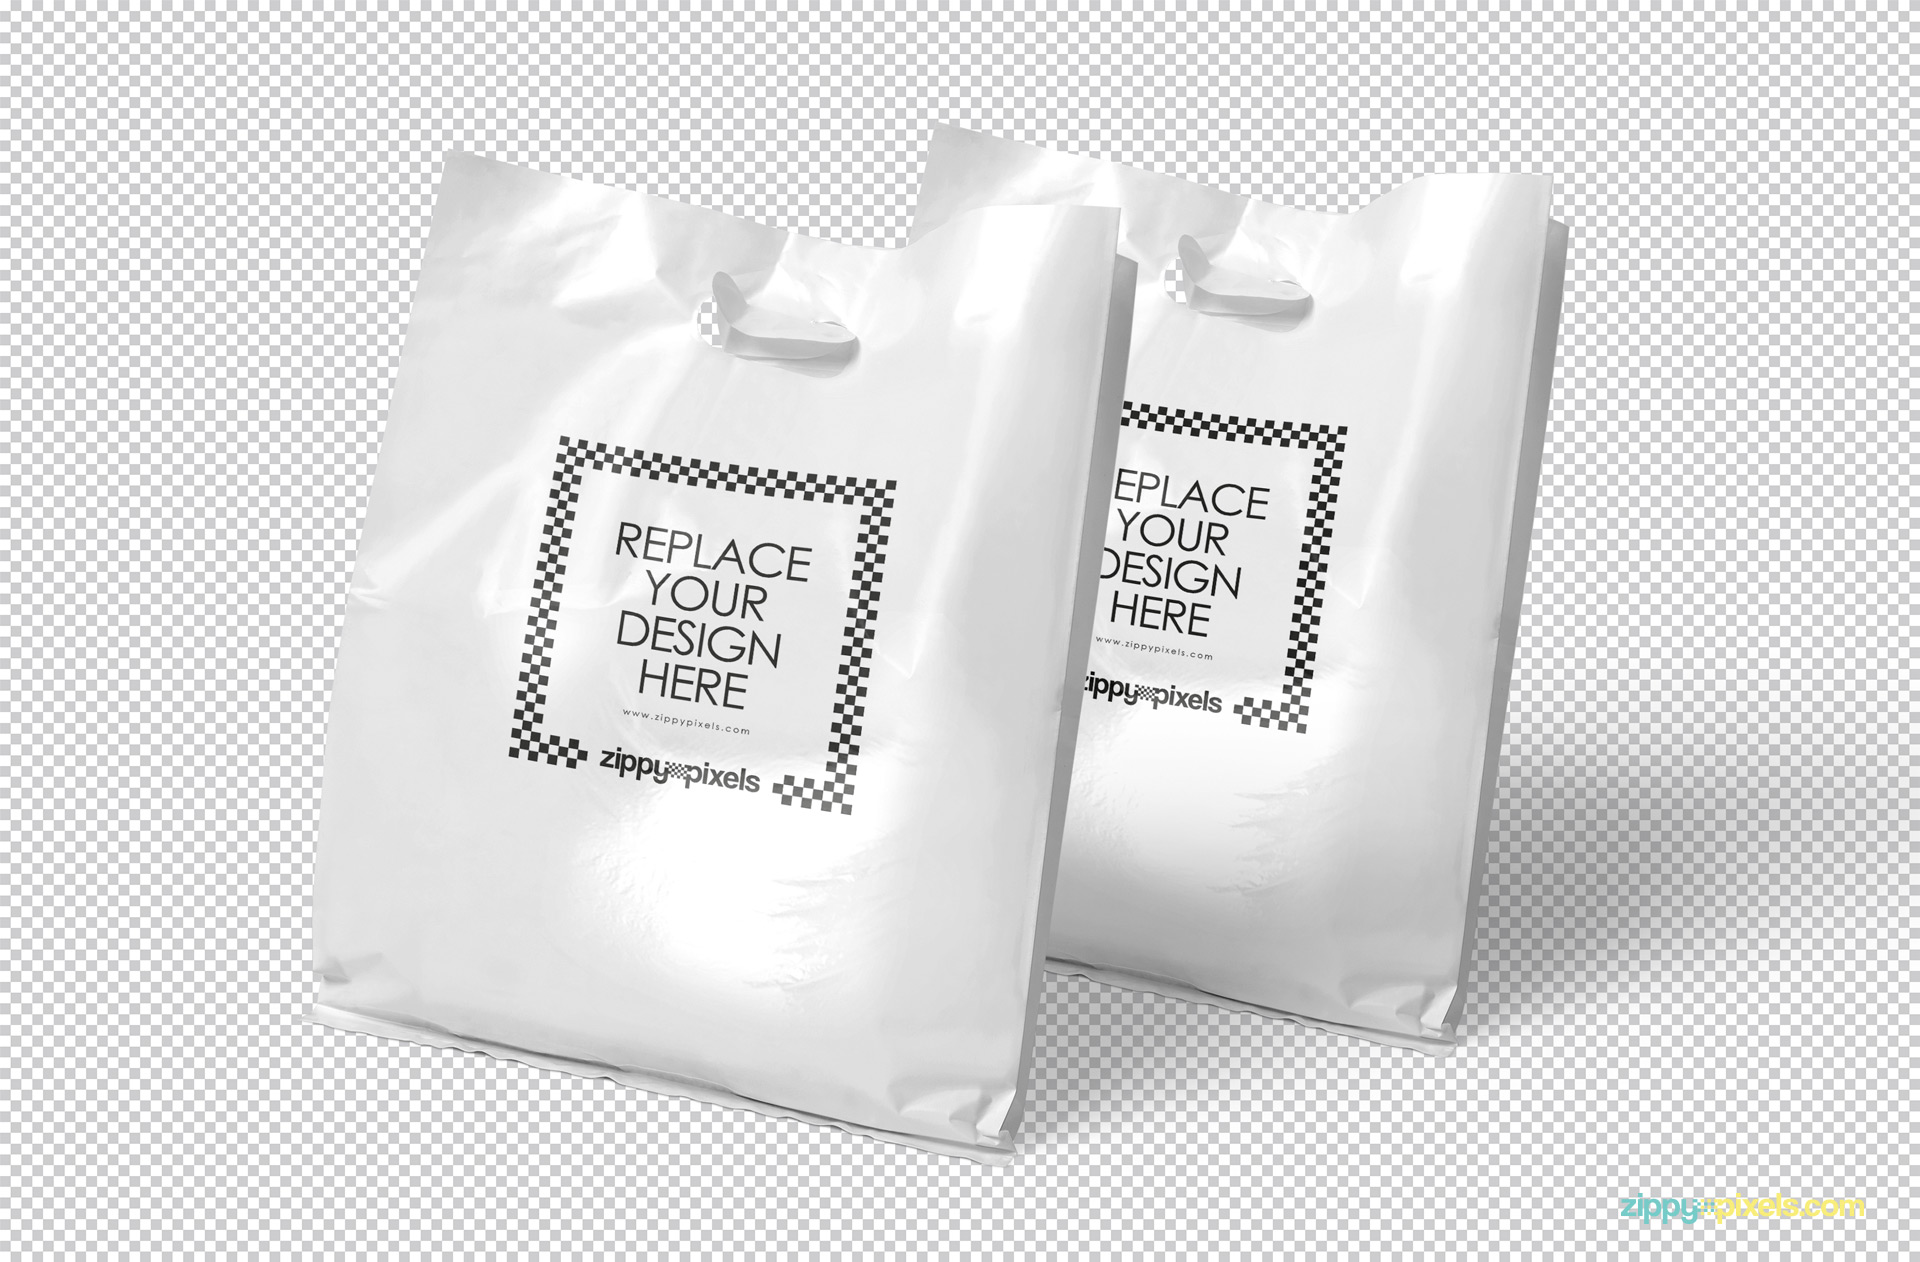 PSD of two plain white bags placed on greyscale.